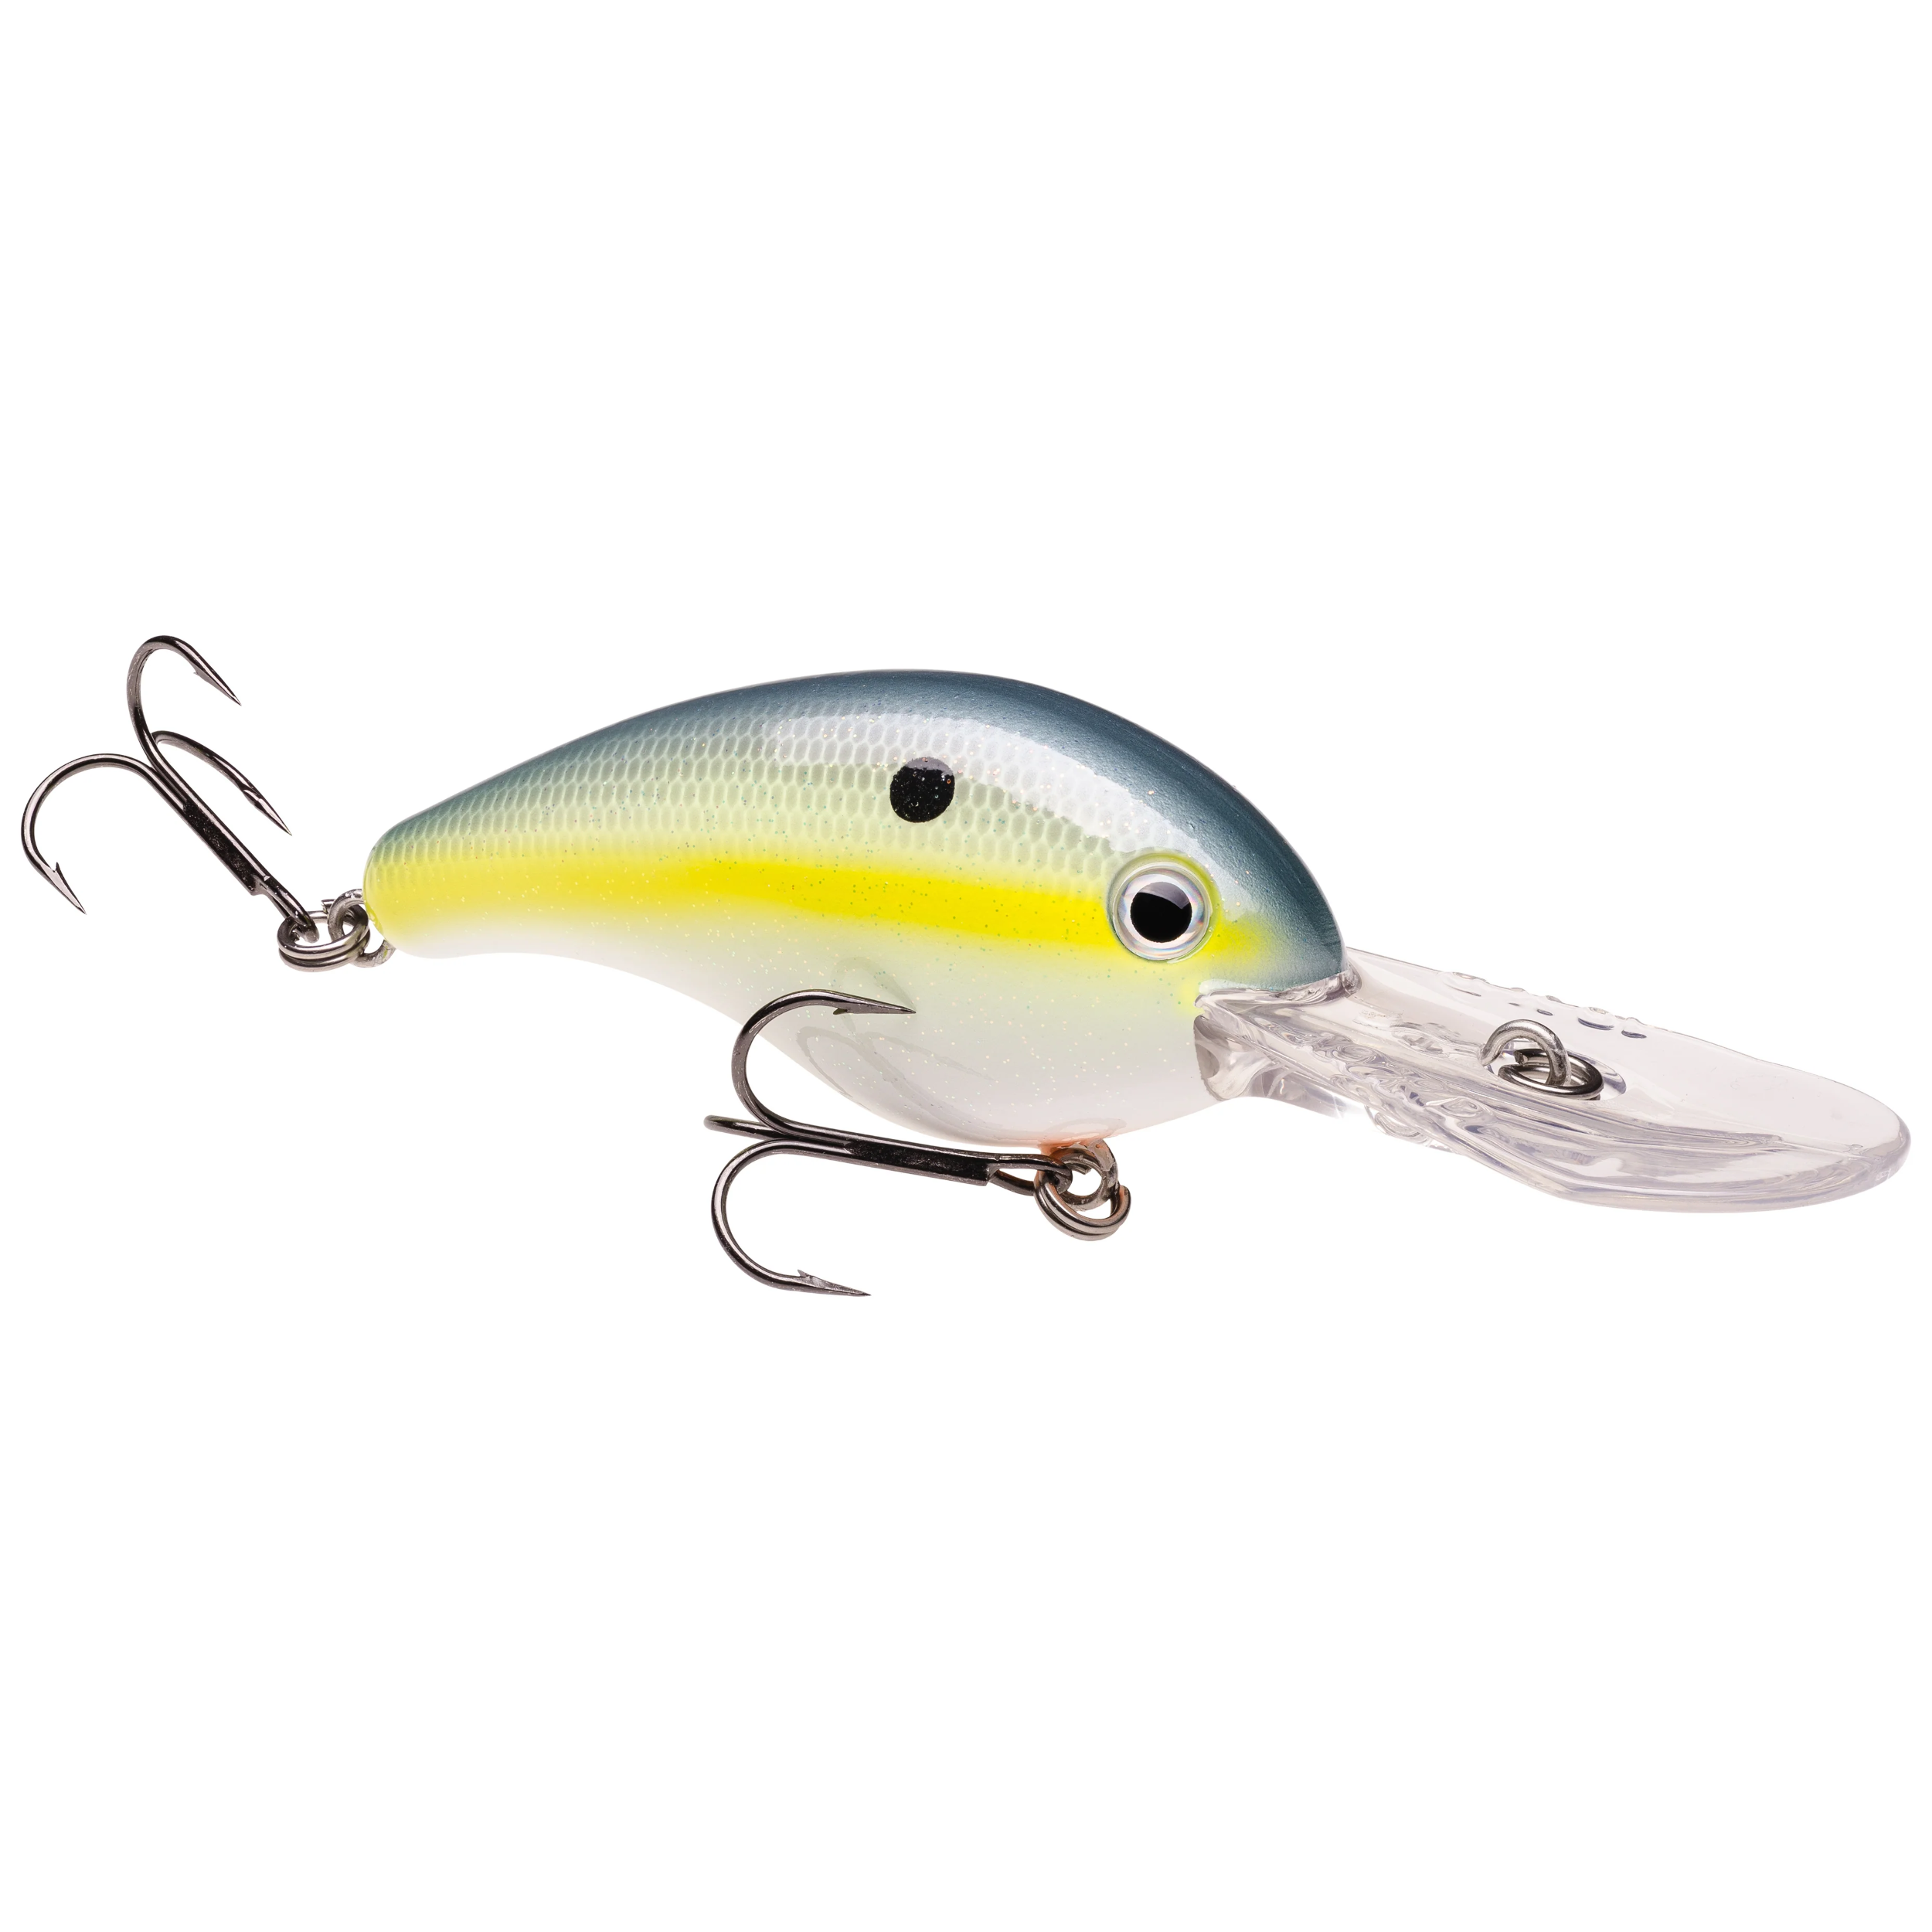 SPRED Soft Bait Silicone Fishing Lure Price in India - Buy SPRED